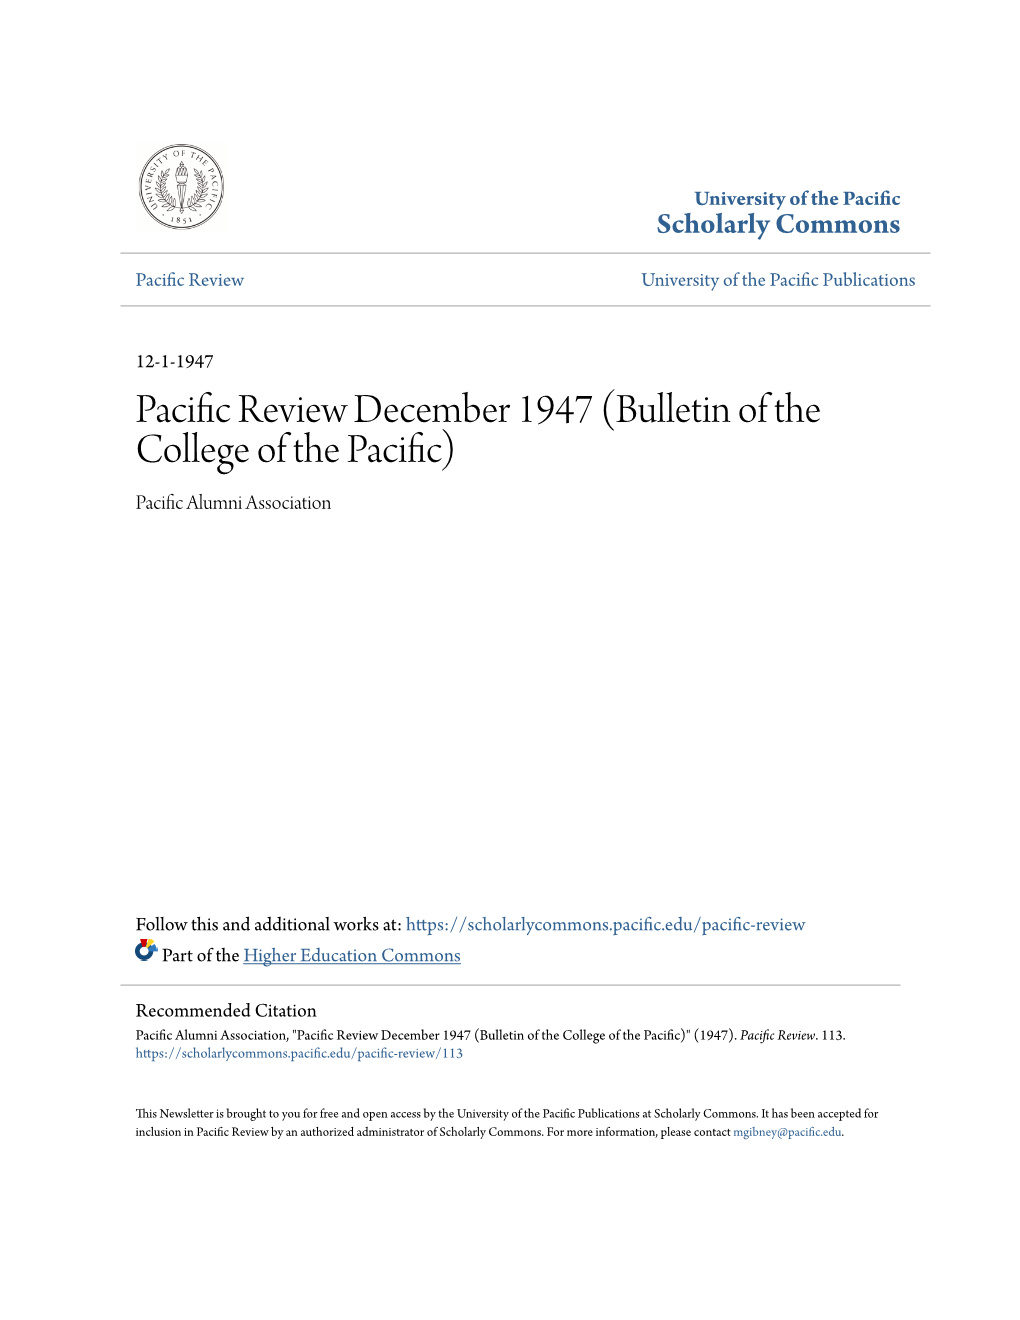 Pacific Review December 1947 (Bulletin of the College of the Pacific) Pacific Alumni Association